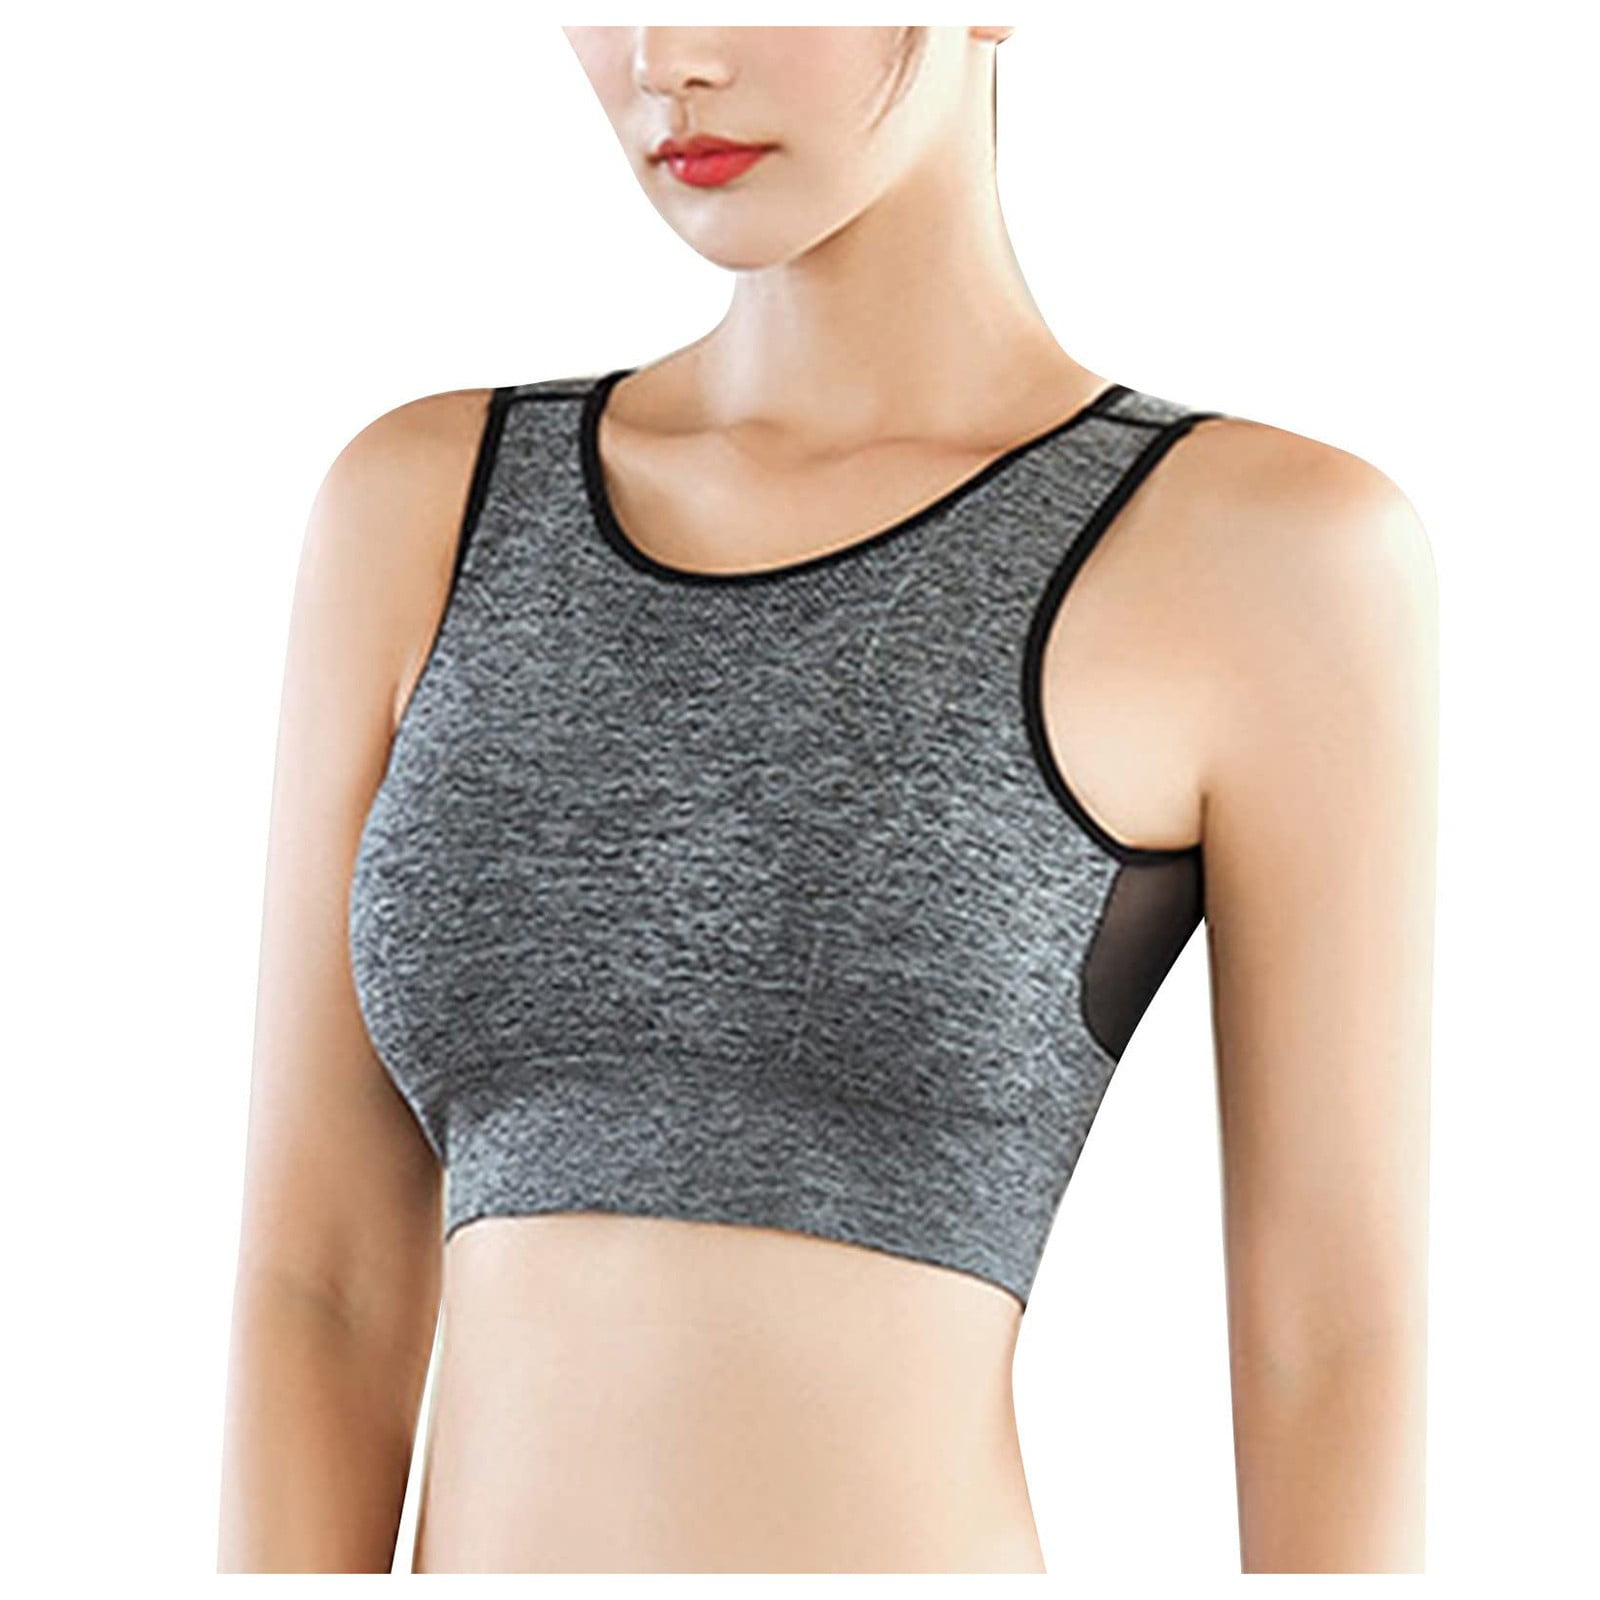 Qcmgmg Women's Supportive Sports Bras Workout Racerback Mesh